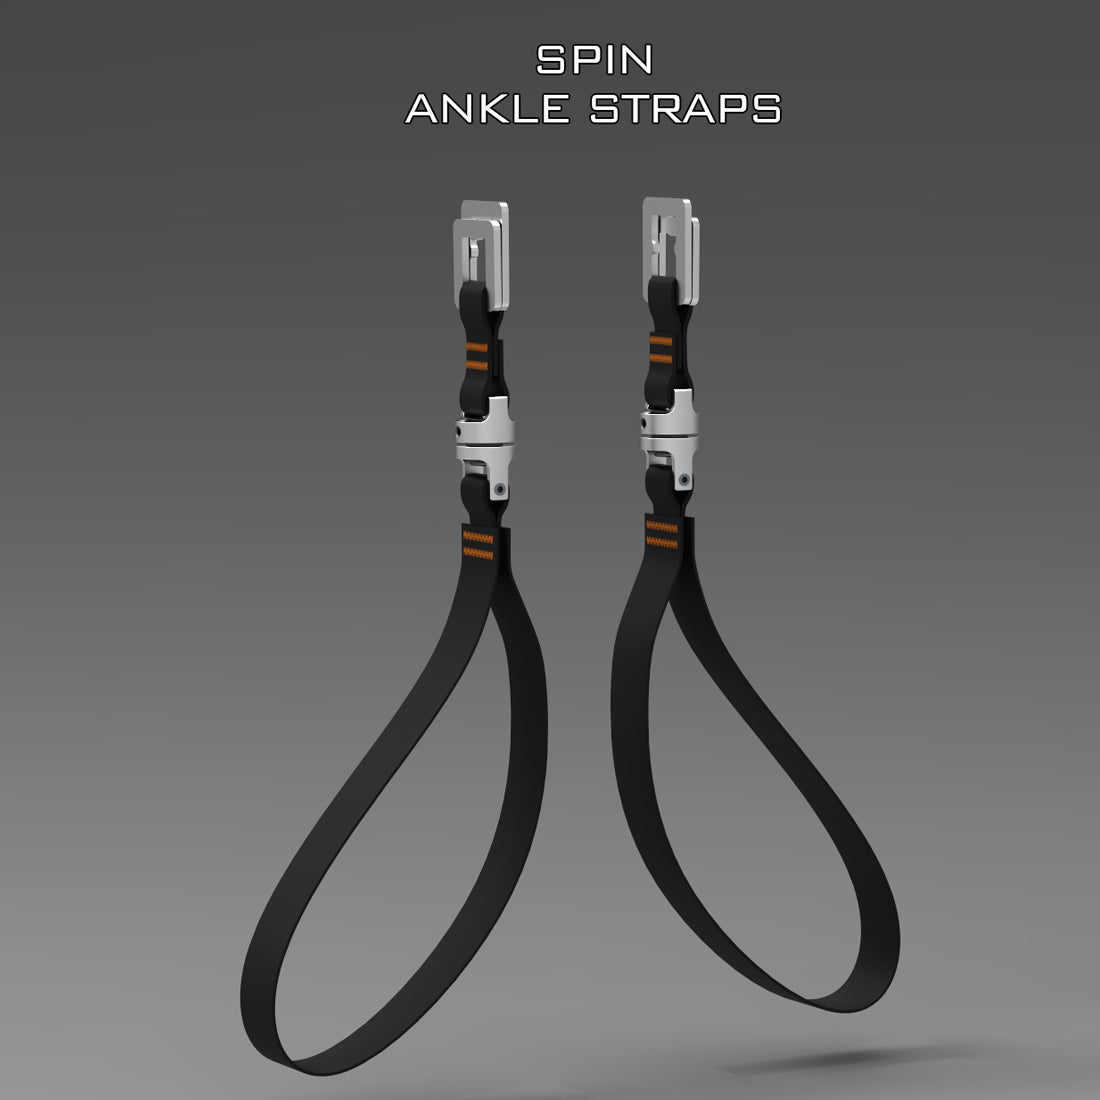 SPIN ANKLE STRAPS